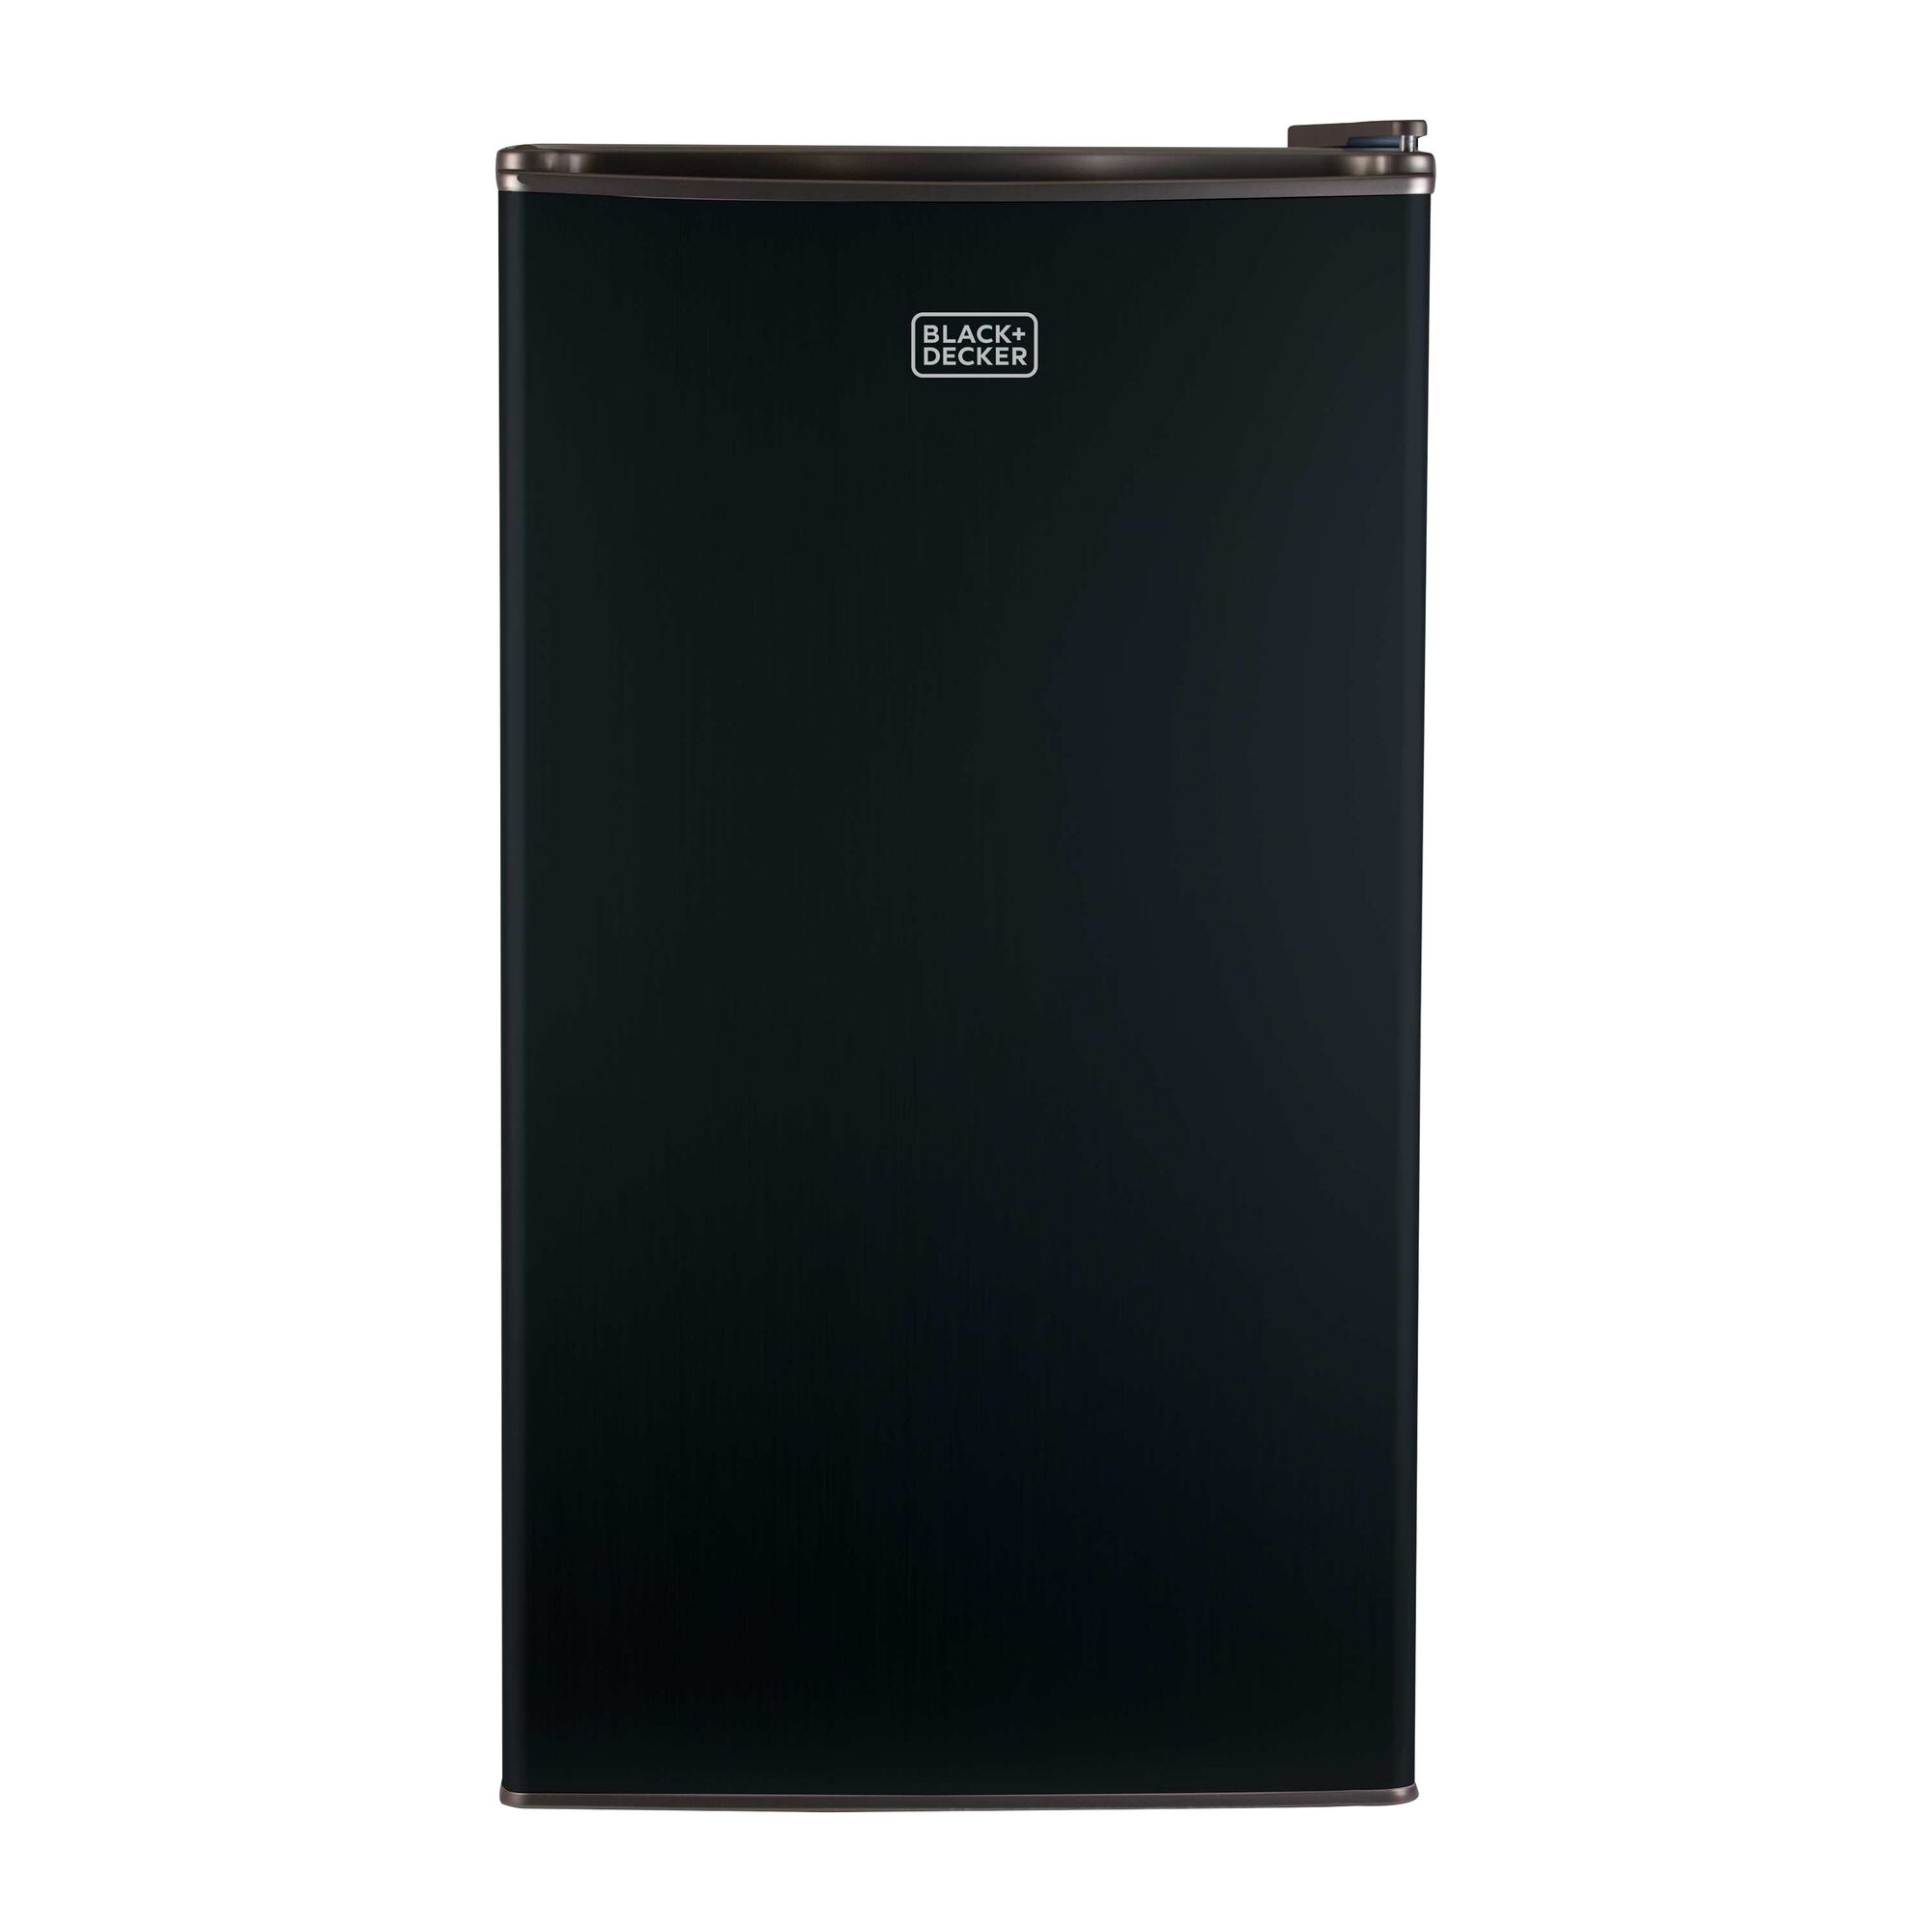 3.2 Cubic foot Energy Star Refrigerator with Freezer.